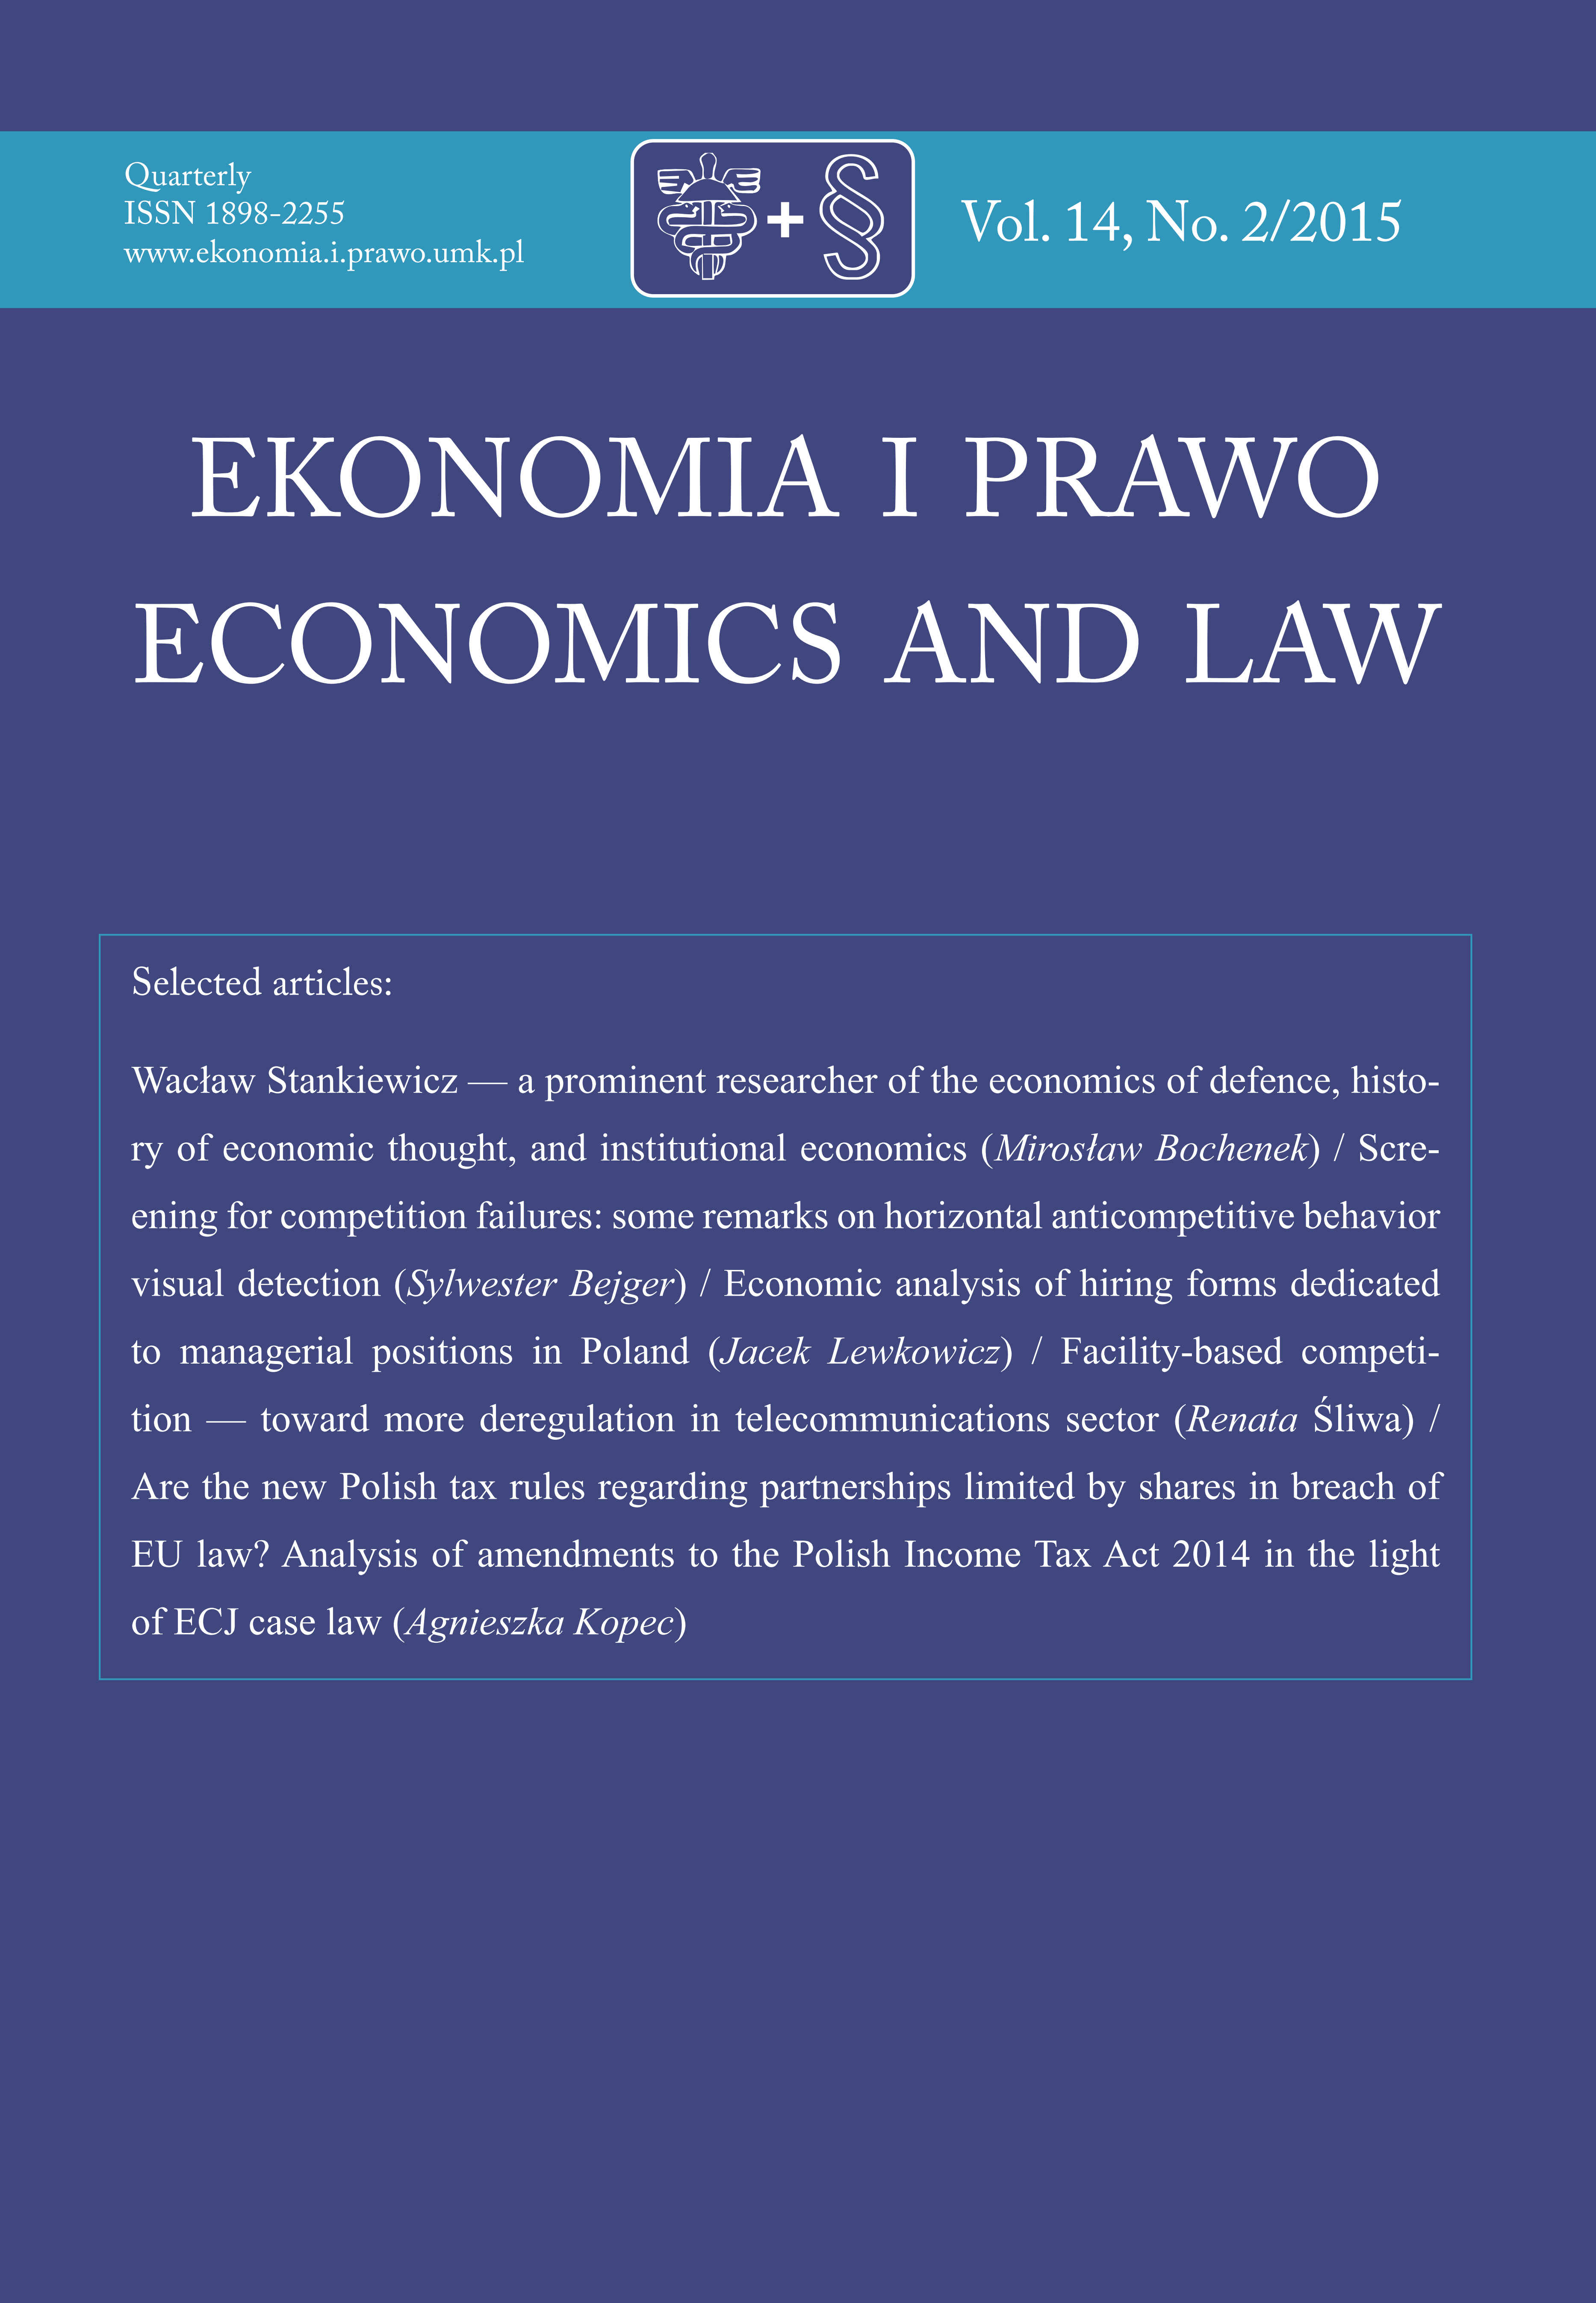 THE CONCEPT OF CORPORATE REPUTATION IN MARKETING AND POLISH LAW — THE SEARCH FOR INTERDISCIPLINARY COMMUNICATION Cover Image